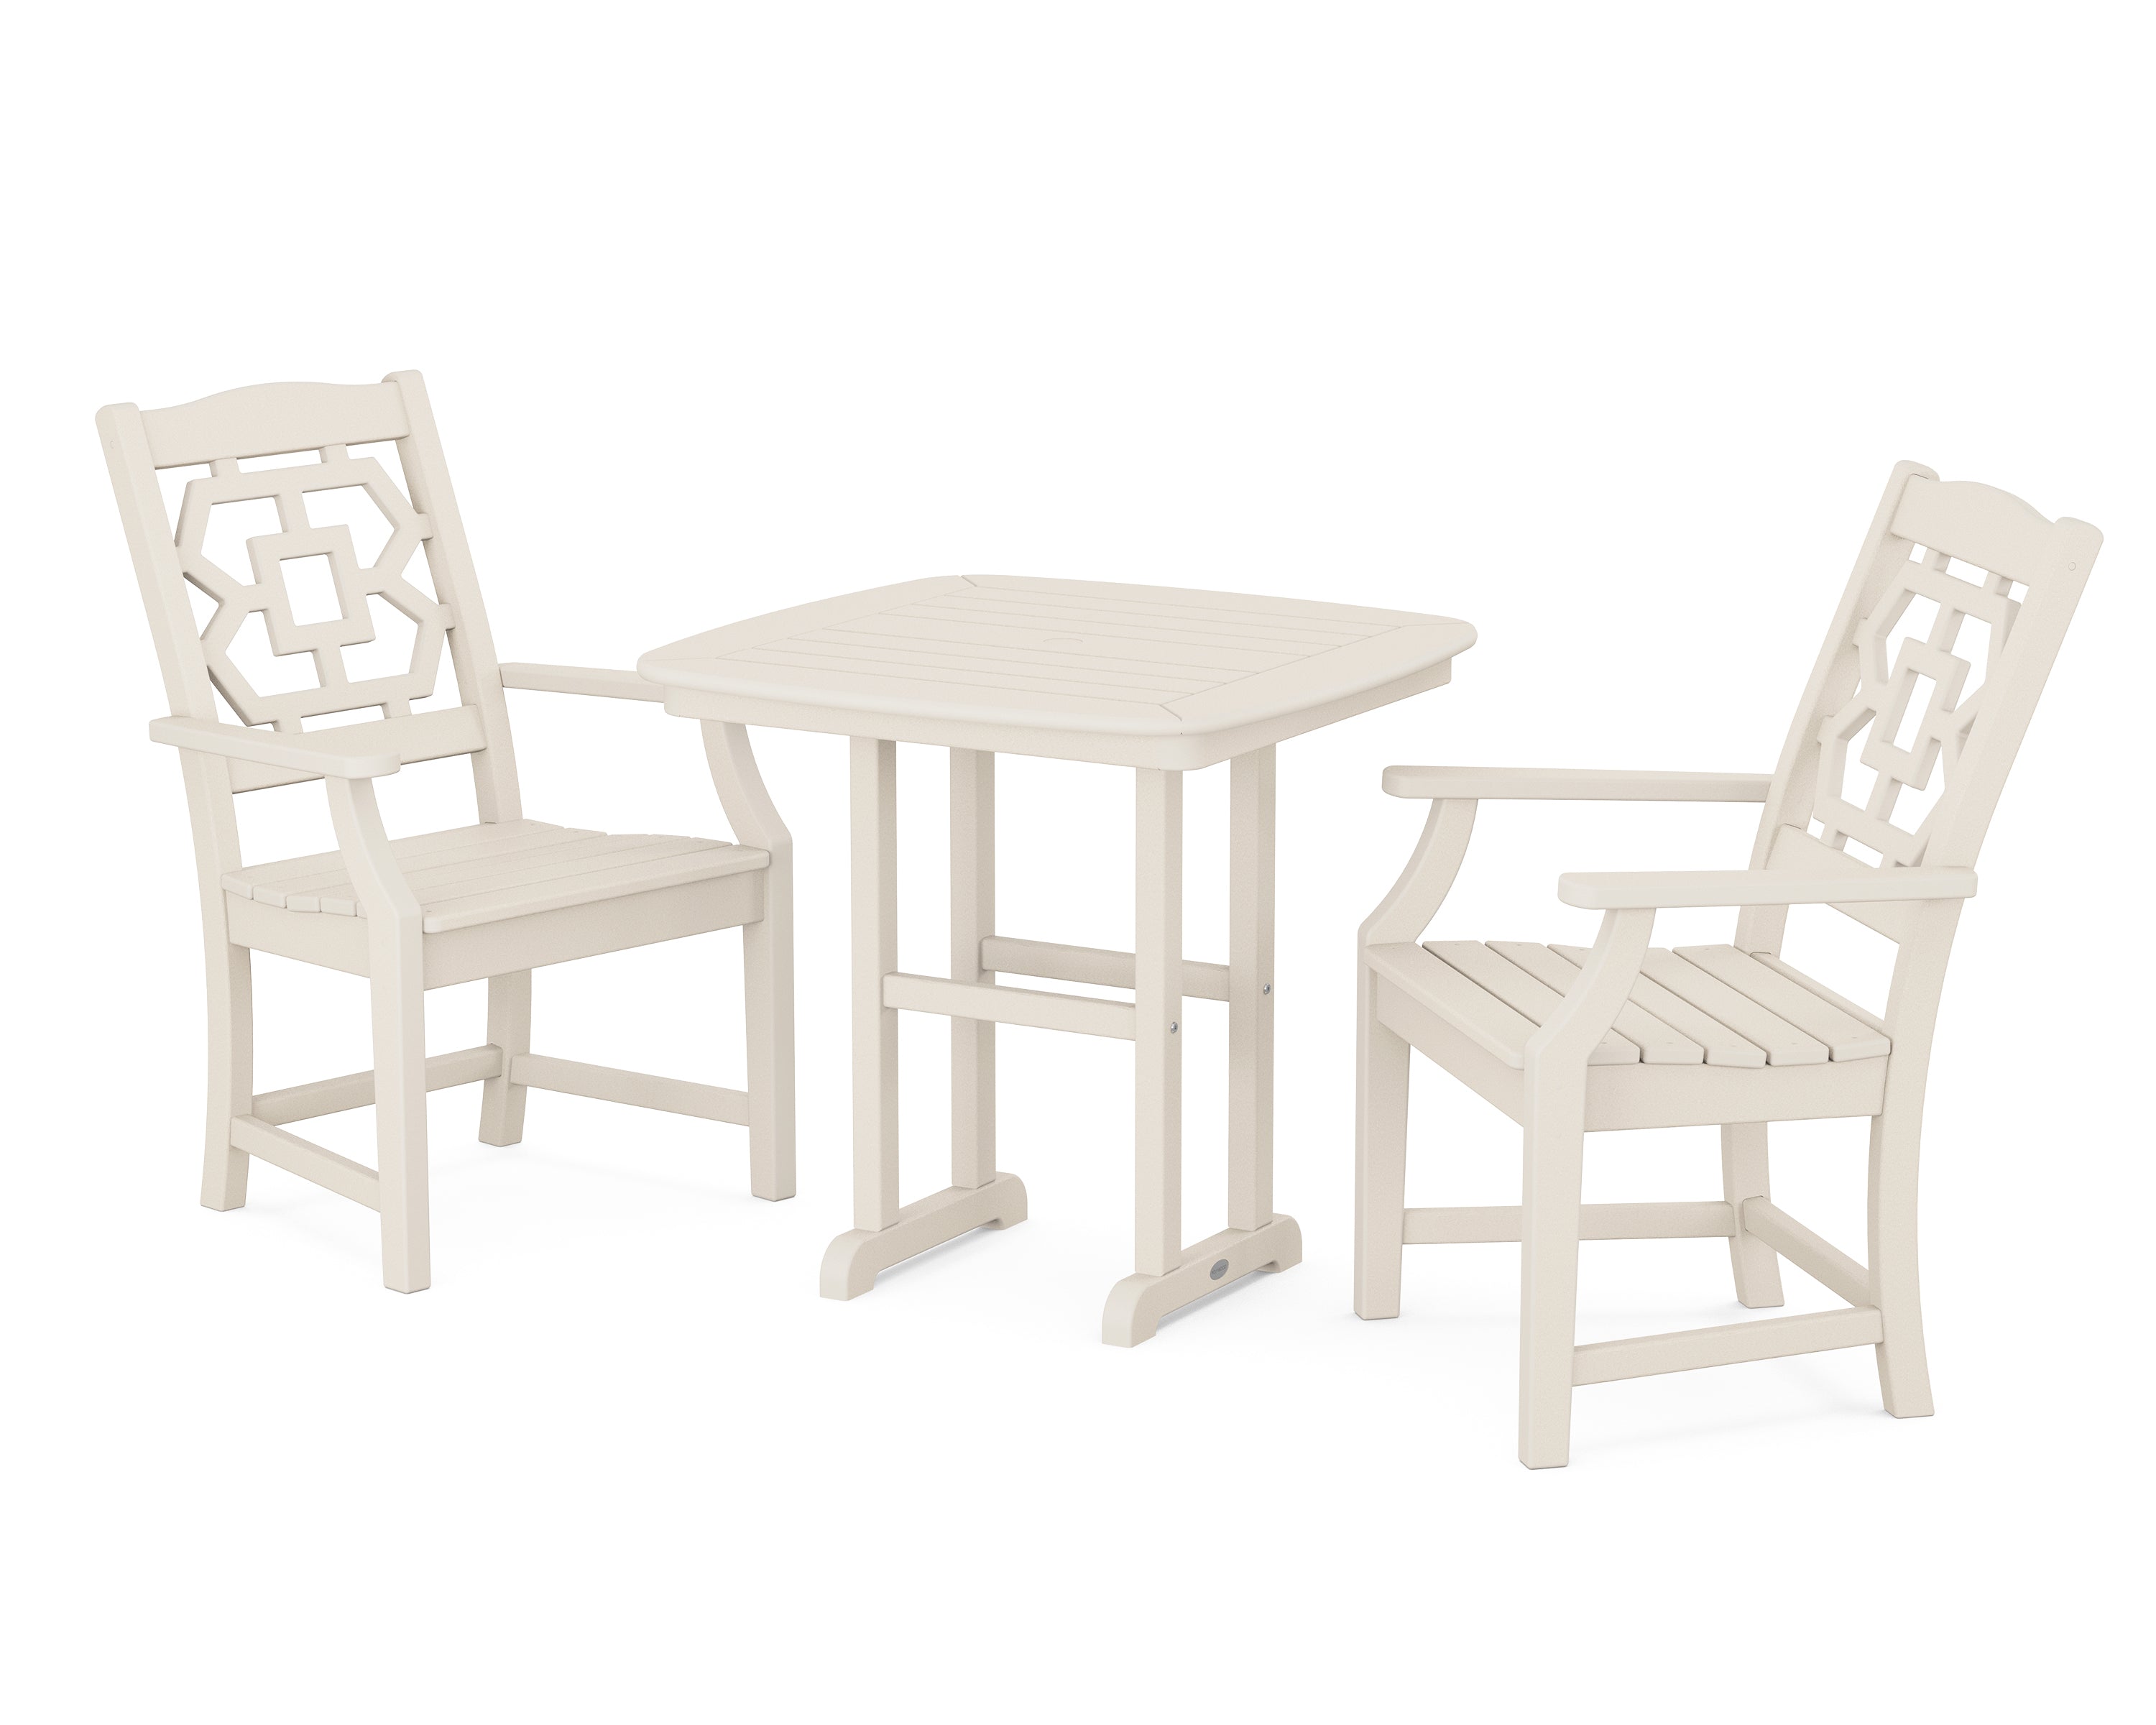 Martha Stewart by POLYWOOD® Chinoiserie 3-Piece Dining Set in Sand